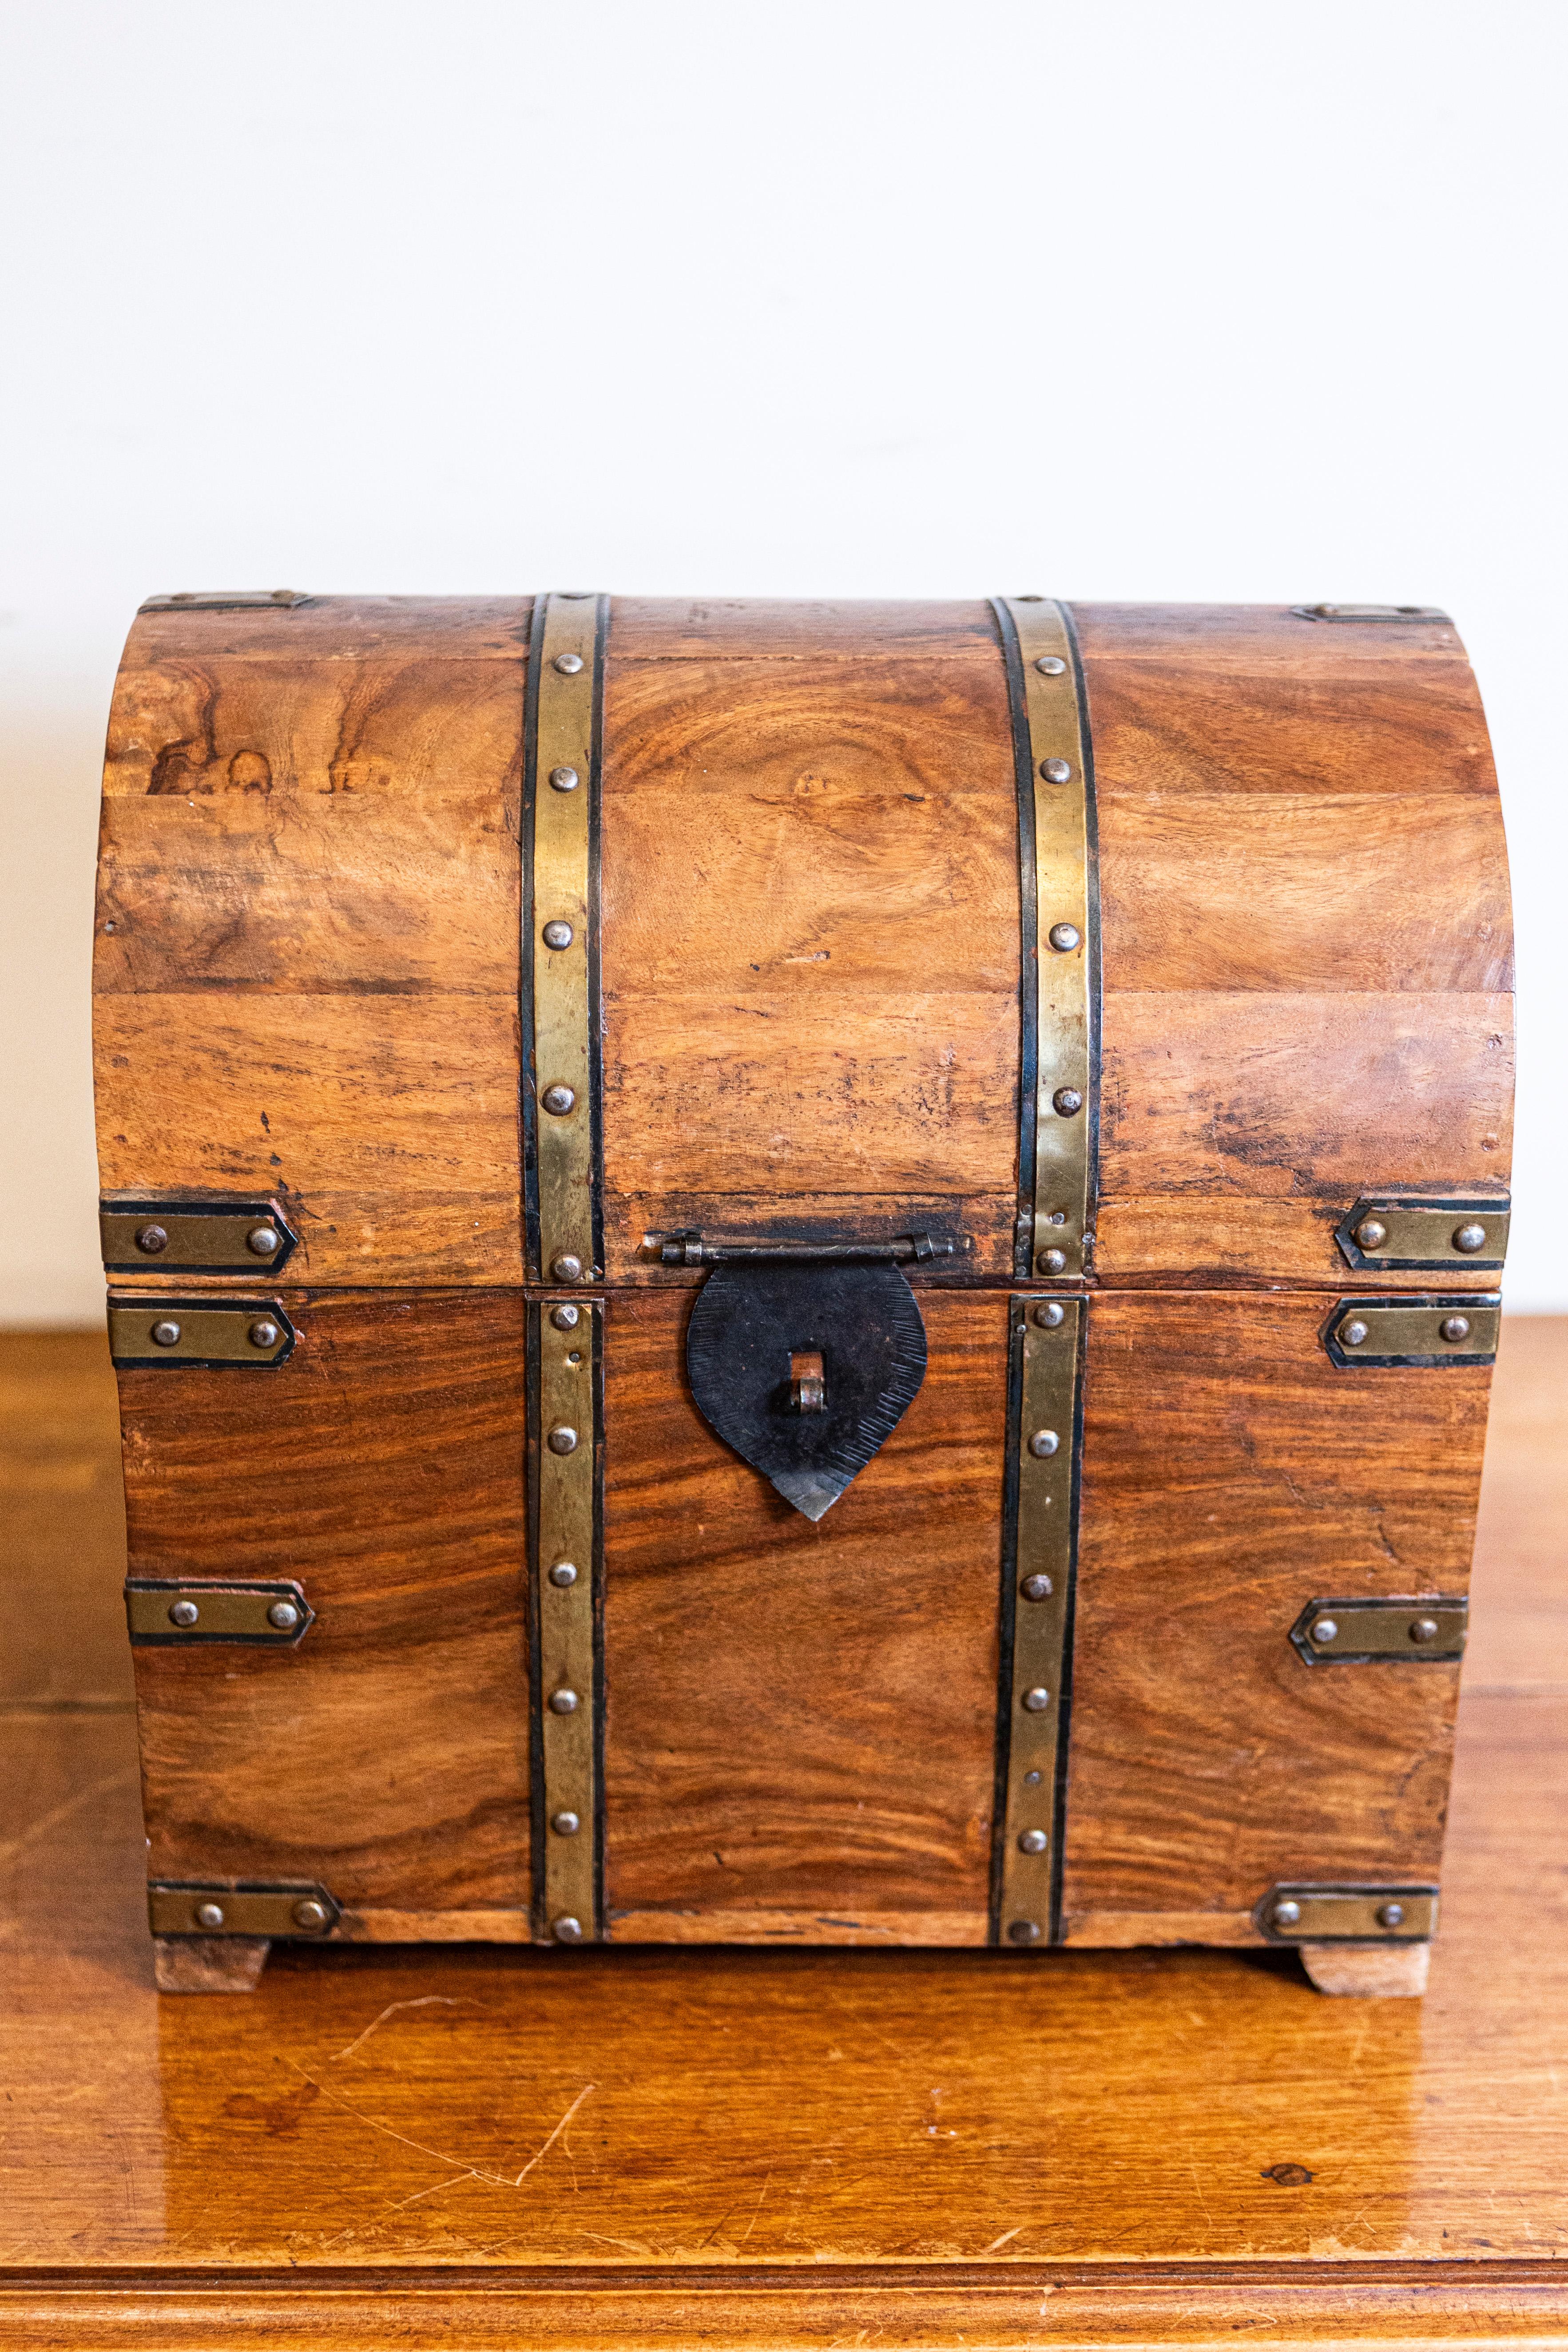 An English vintage wooden treasure chest-shaped cellarette from the 20th century with dome top and brass braces. This English vintage treasure chest-shaped cellarette, crafted in the 20th century, captures the allure of classic design with its